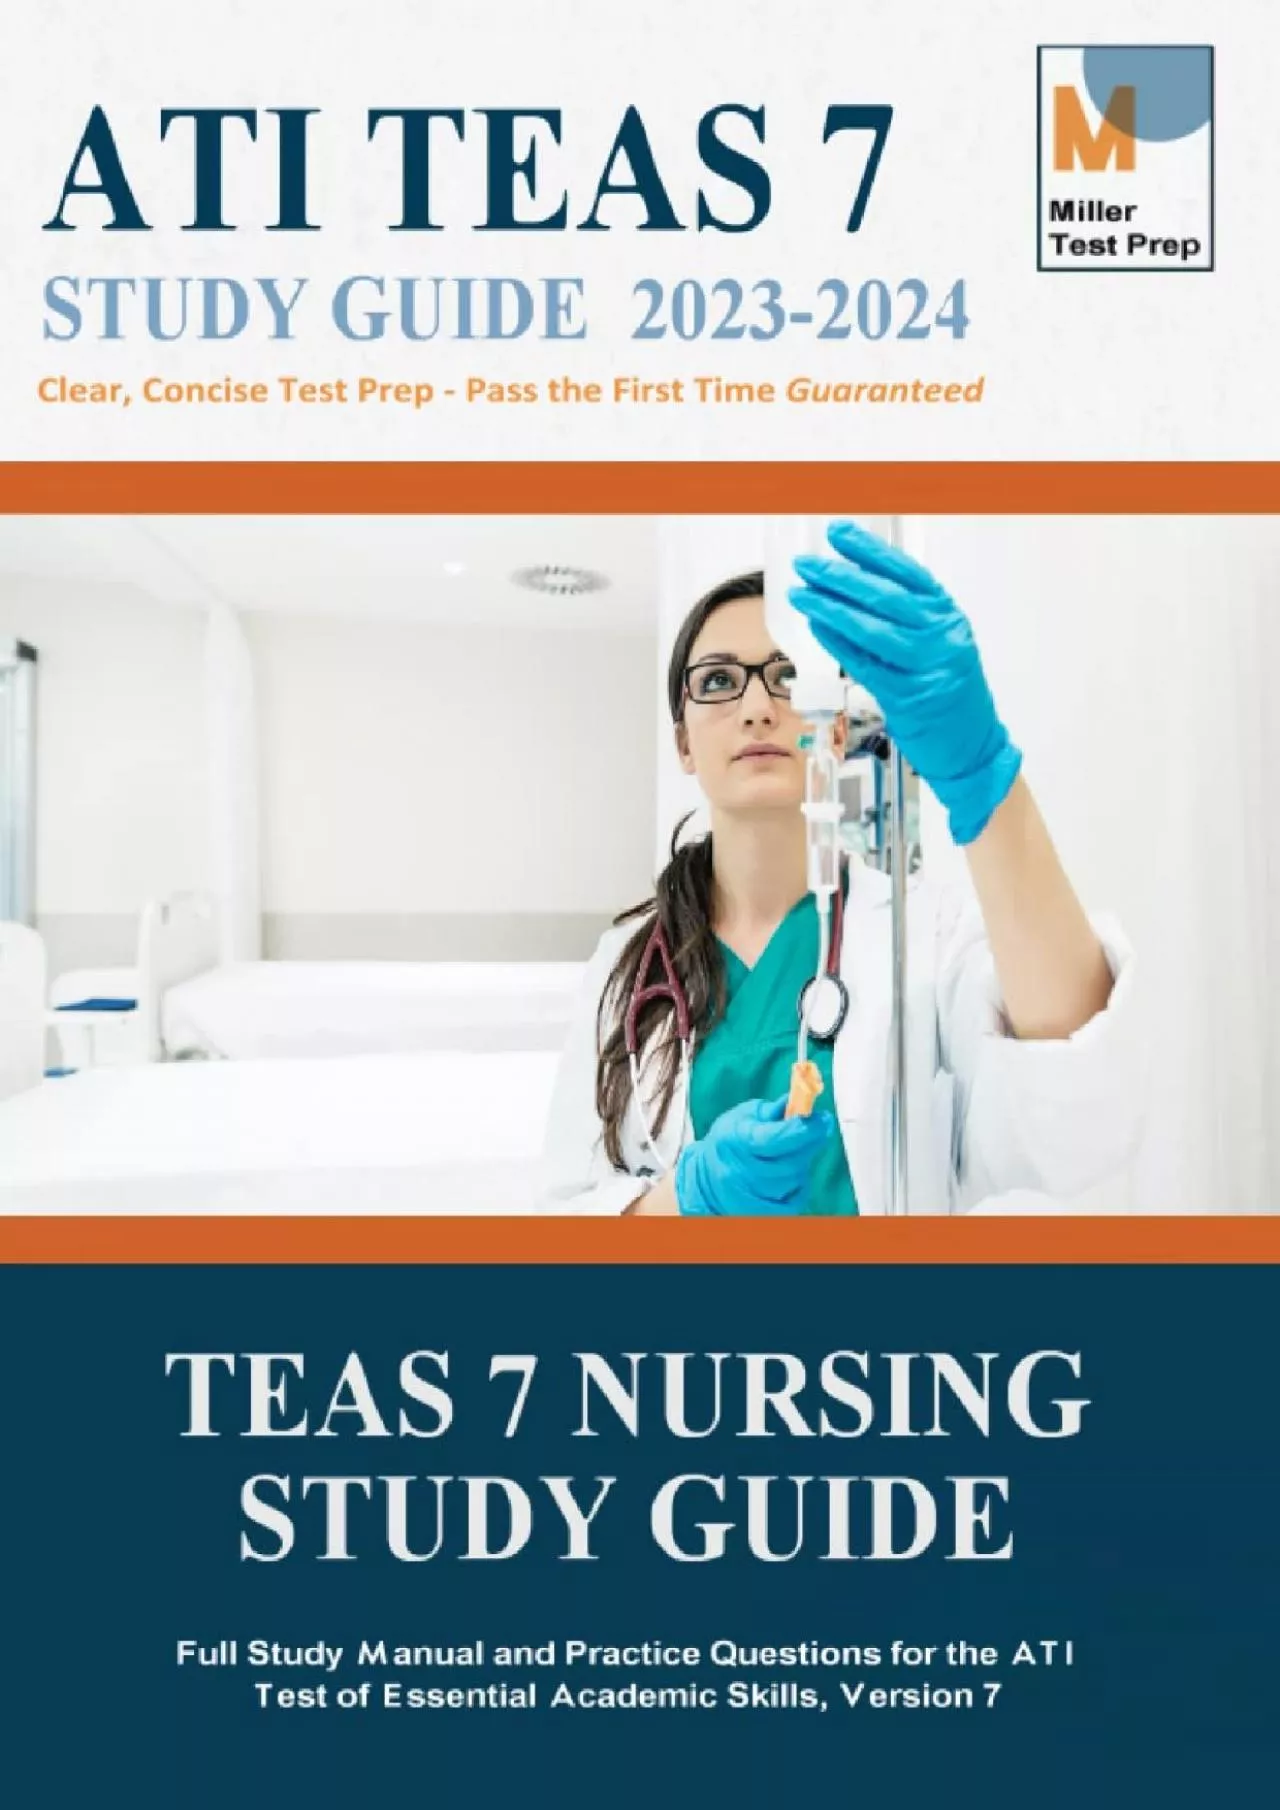 [EBOOK] TEAS 7 Nursing Study Guide: Full Study Manual and Practice Questions for the ATI